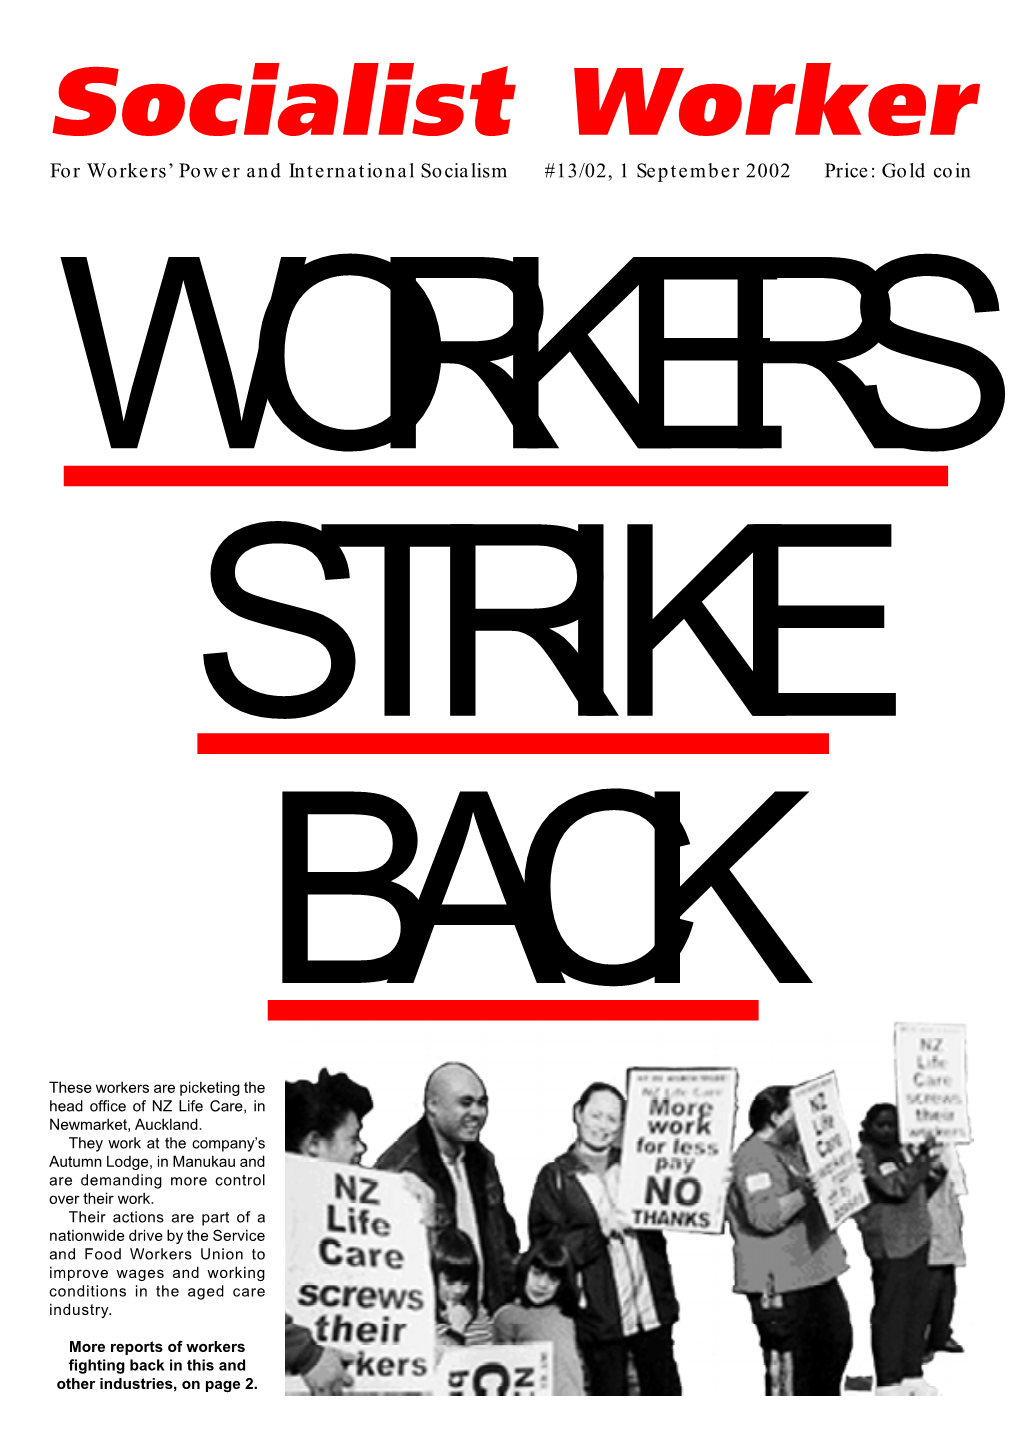 Socialist Worker for Workers’ Power and International Socialism #13/02, 1 September 2002 Price: Gold Coin WORKERS STRIKE BACK